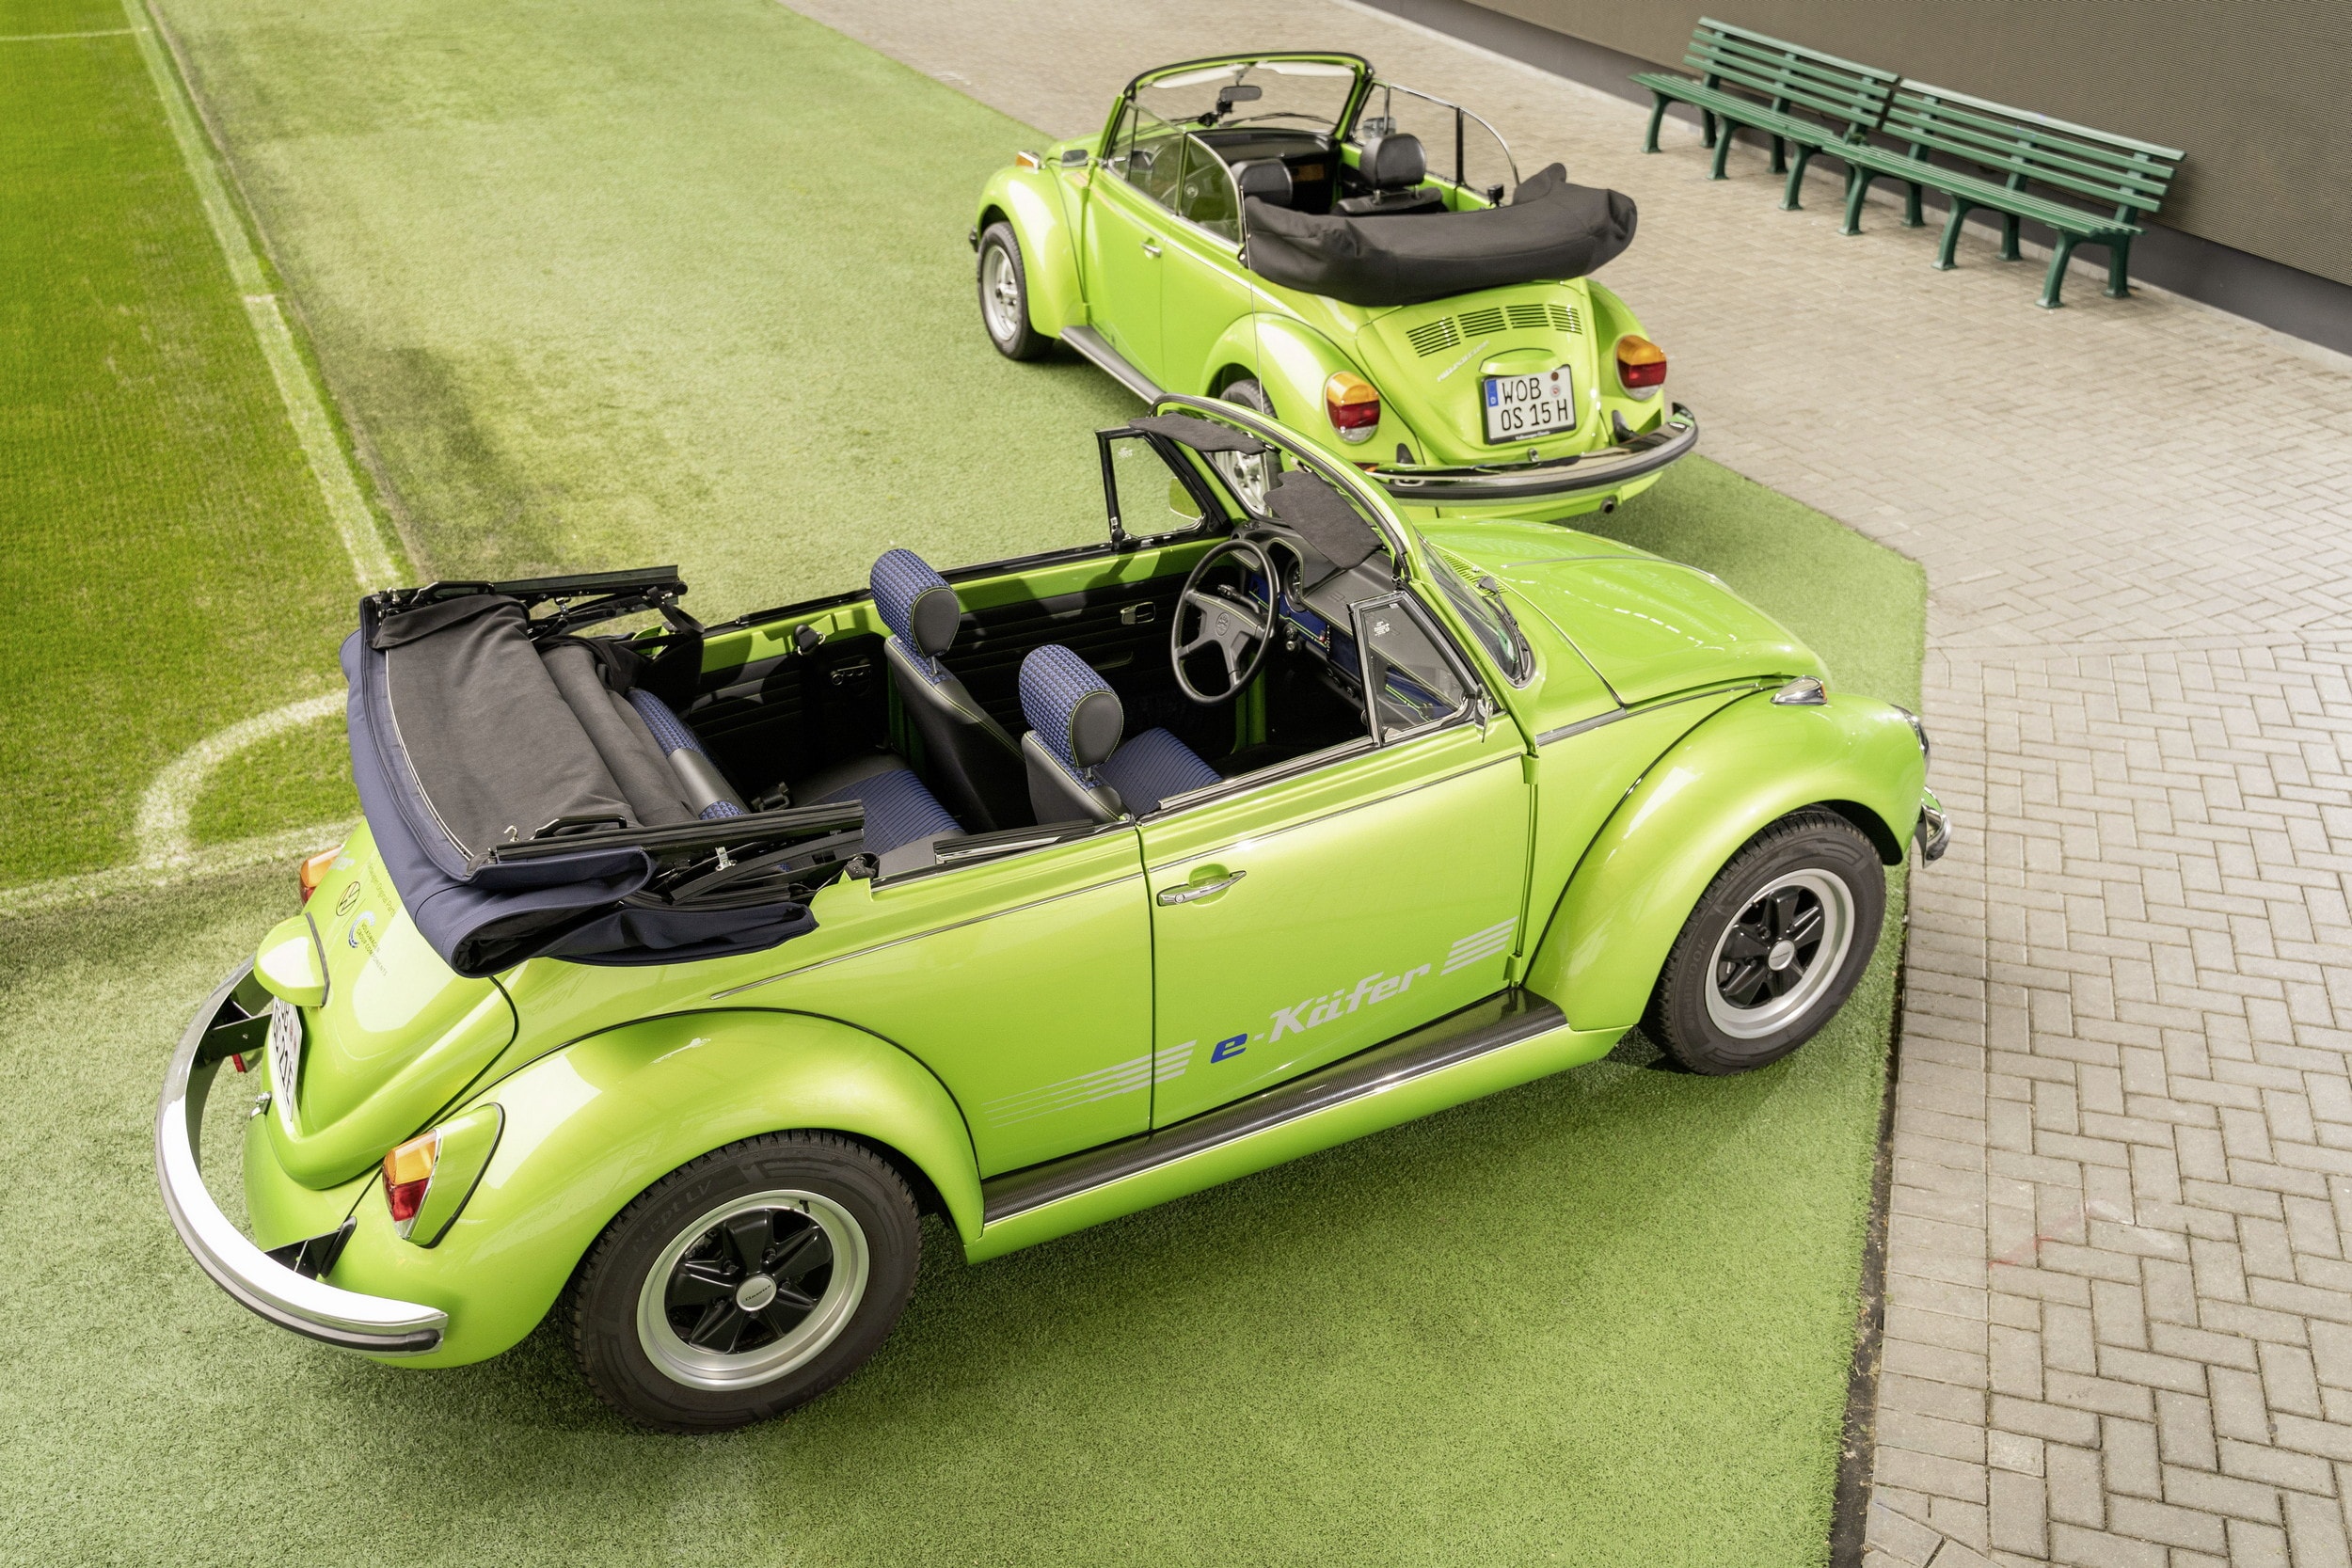 VW Heavily Modifies Two Vintage Cabriolet Beetles and Invites